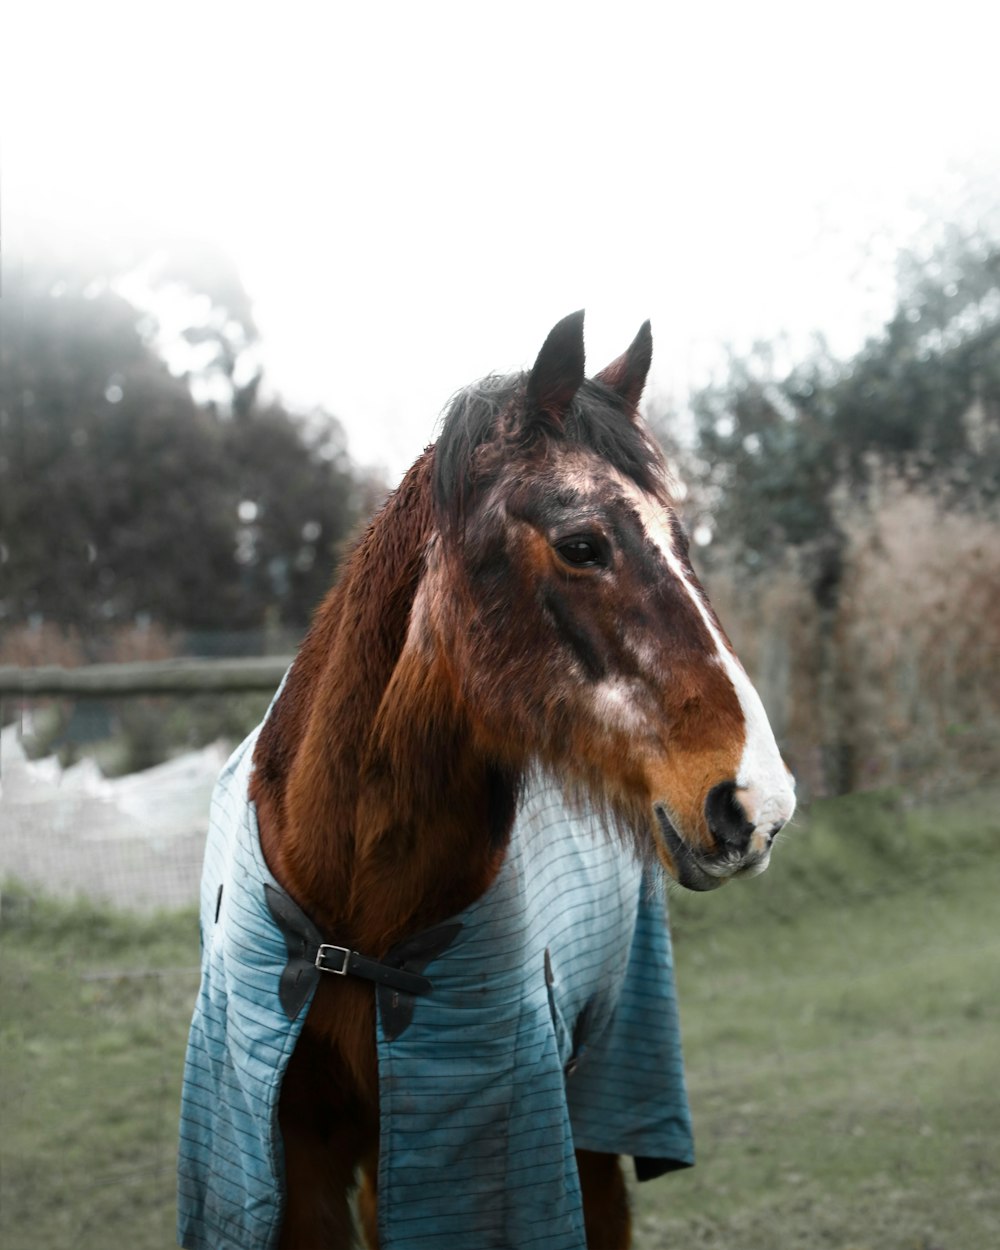 person in blue denim jeans standing beside brown horse during daytime